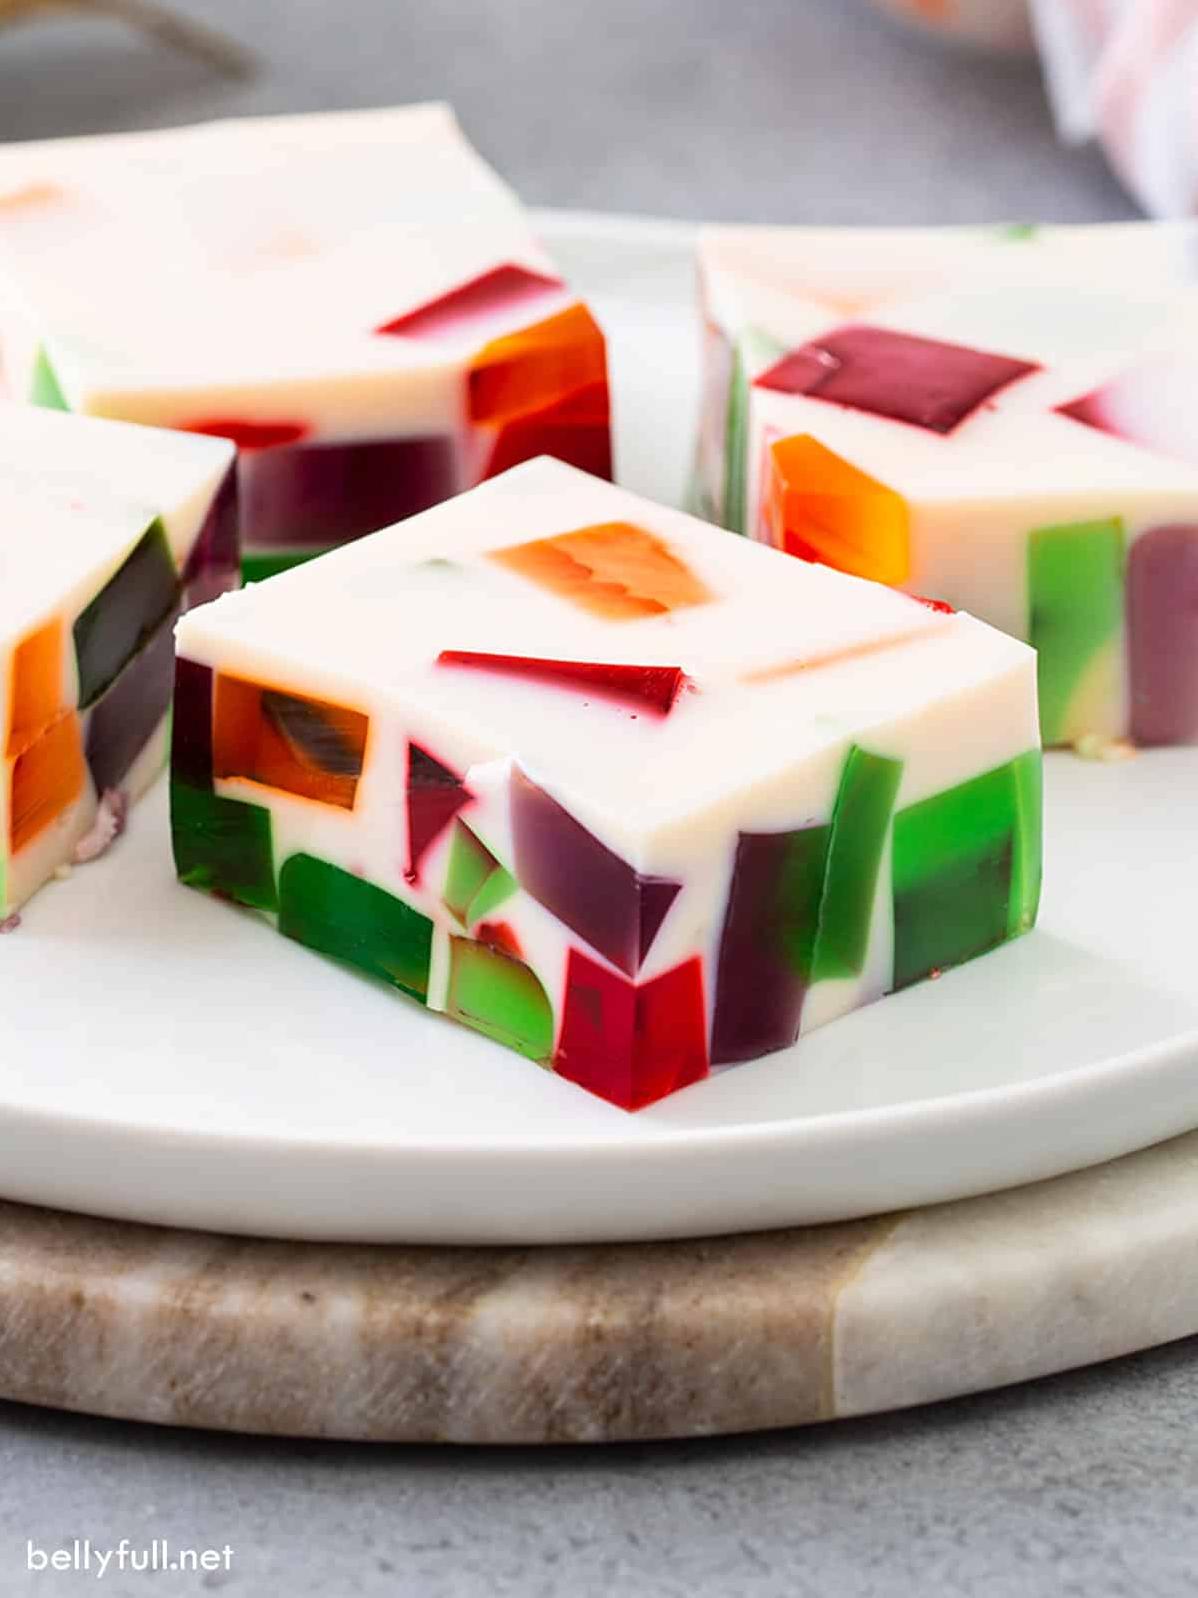  Bring some fun to your table with this playful dessert.